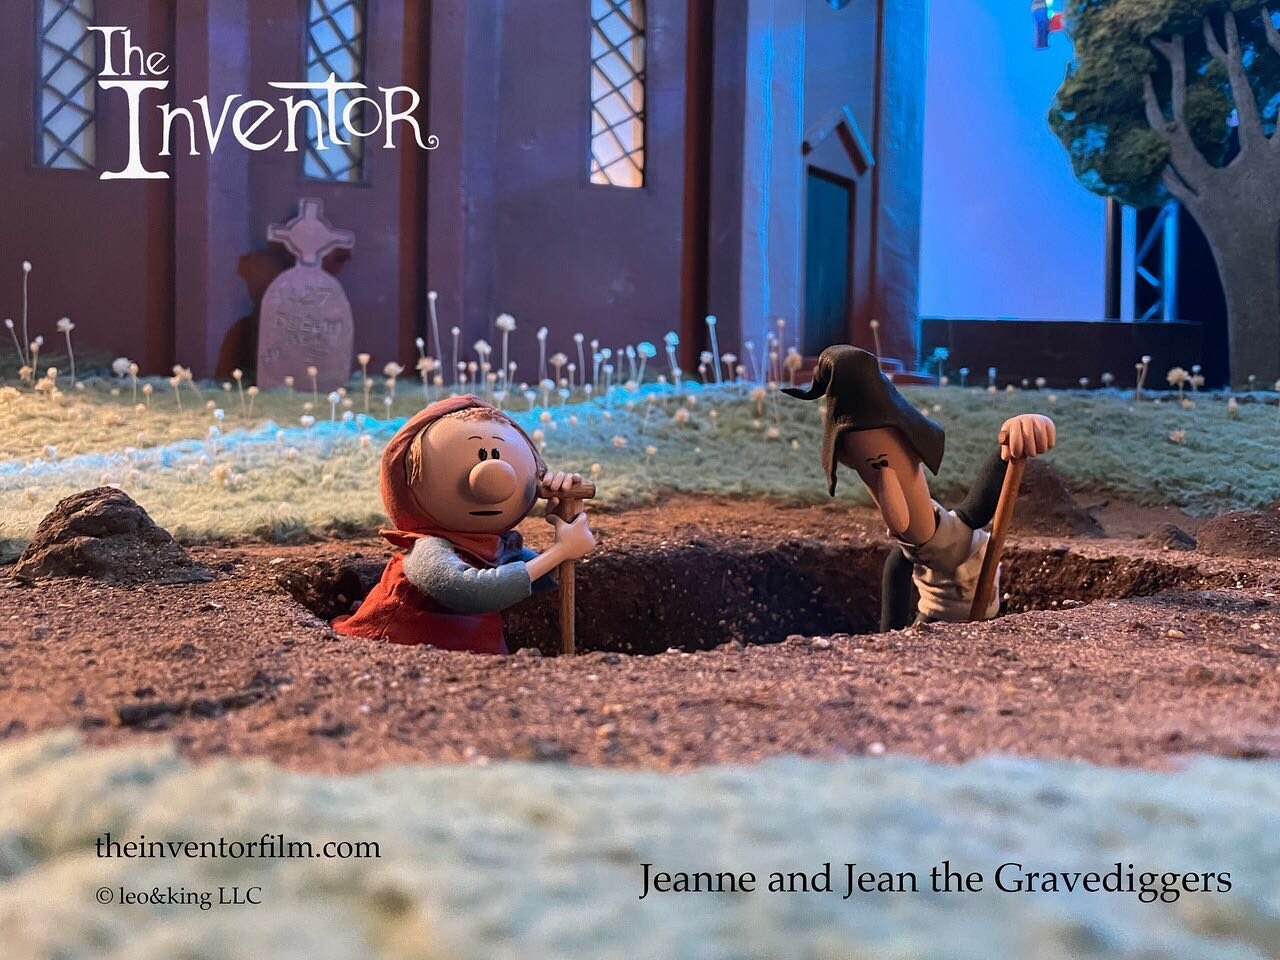 Keep your eyes peeled in 2023 for this beautiful animated feature film, The Inventor written and directed by our friend @capobianco_jim . These two characters are voiced by Jane and myself. The film also features characters voiced by LA clown friends